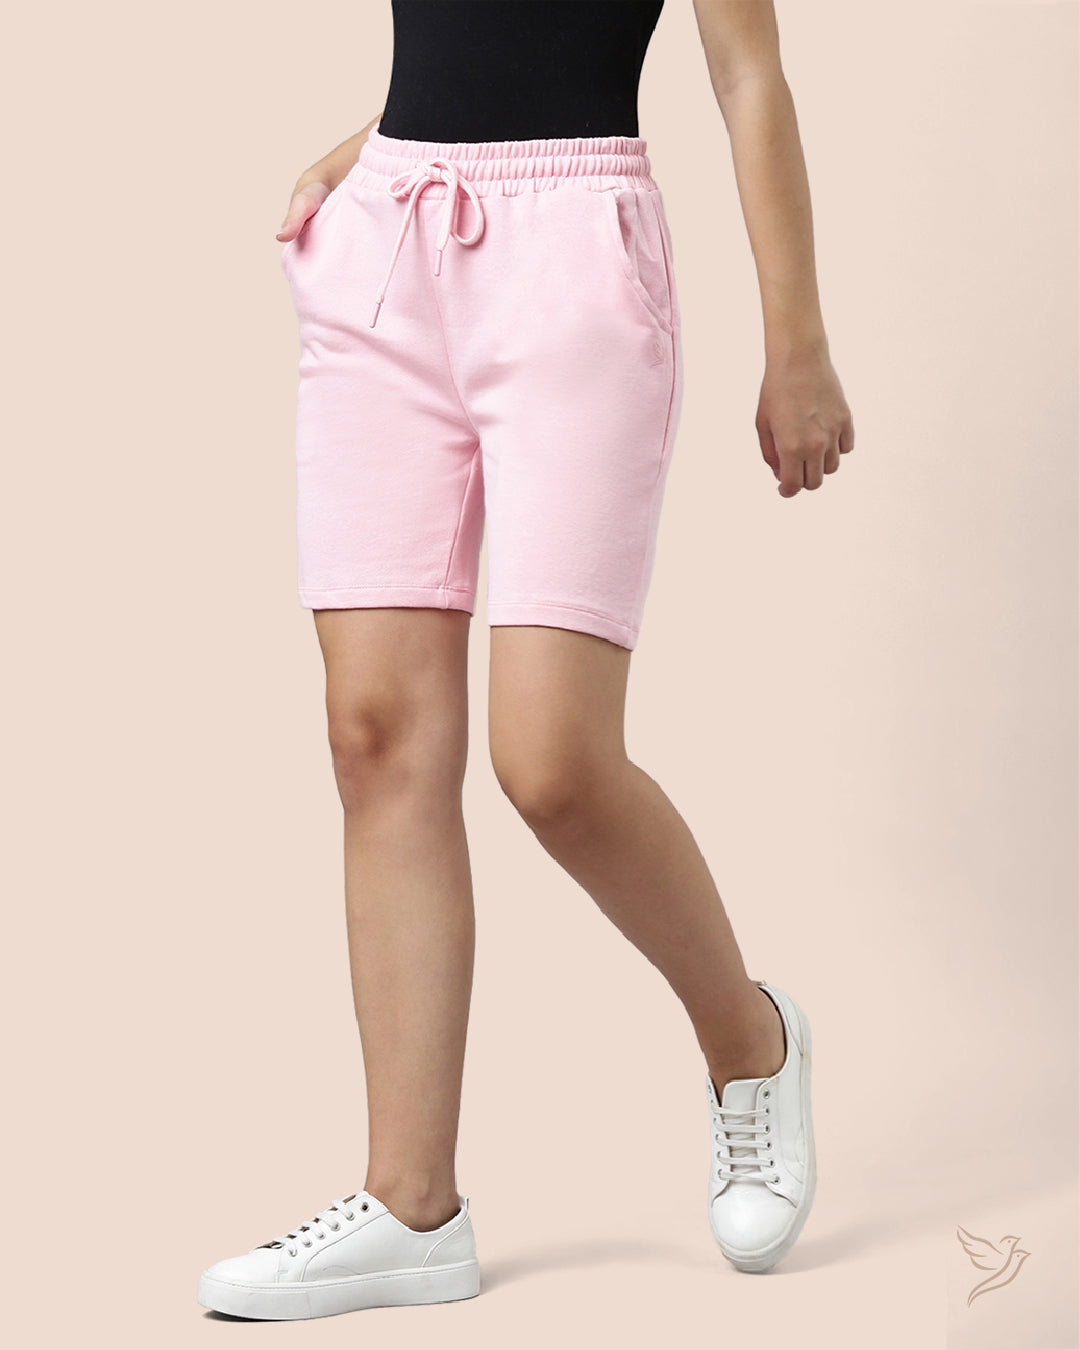 Light Pink Shorts for College Girls